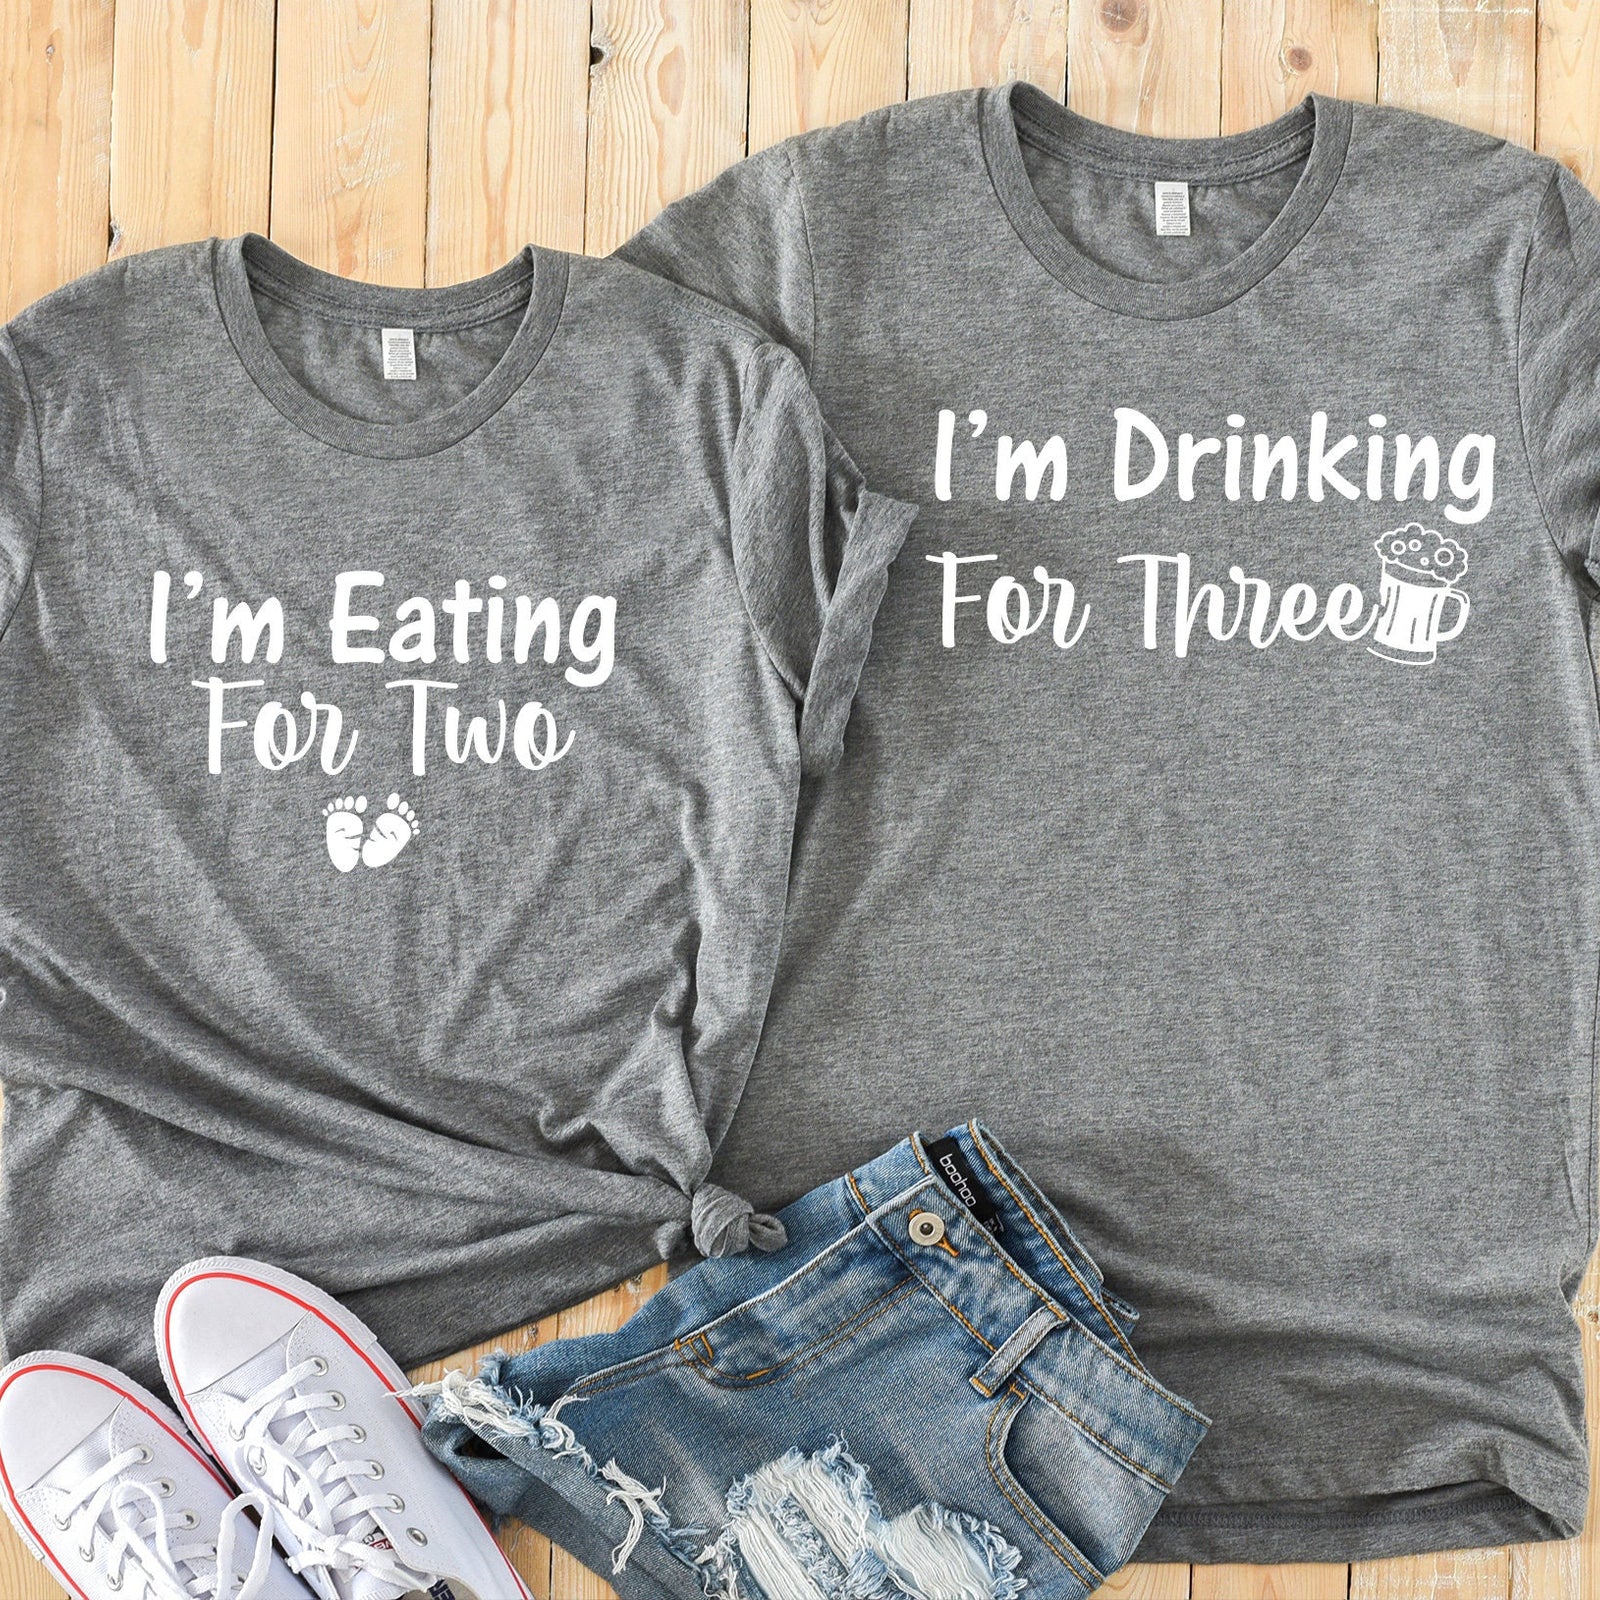 I'm Eating for Two and I'm Drinking for Three T Shirts - Cute Pregnanc –  PrintChix